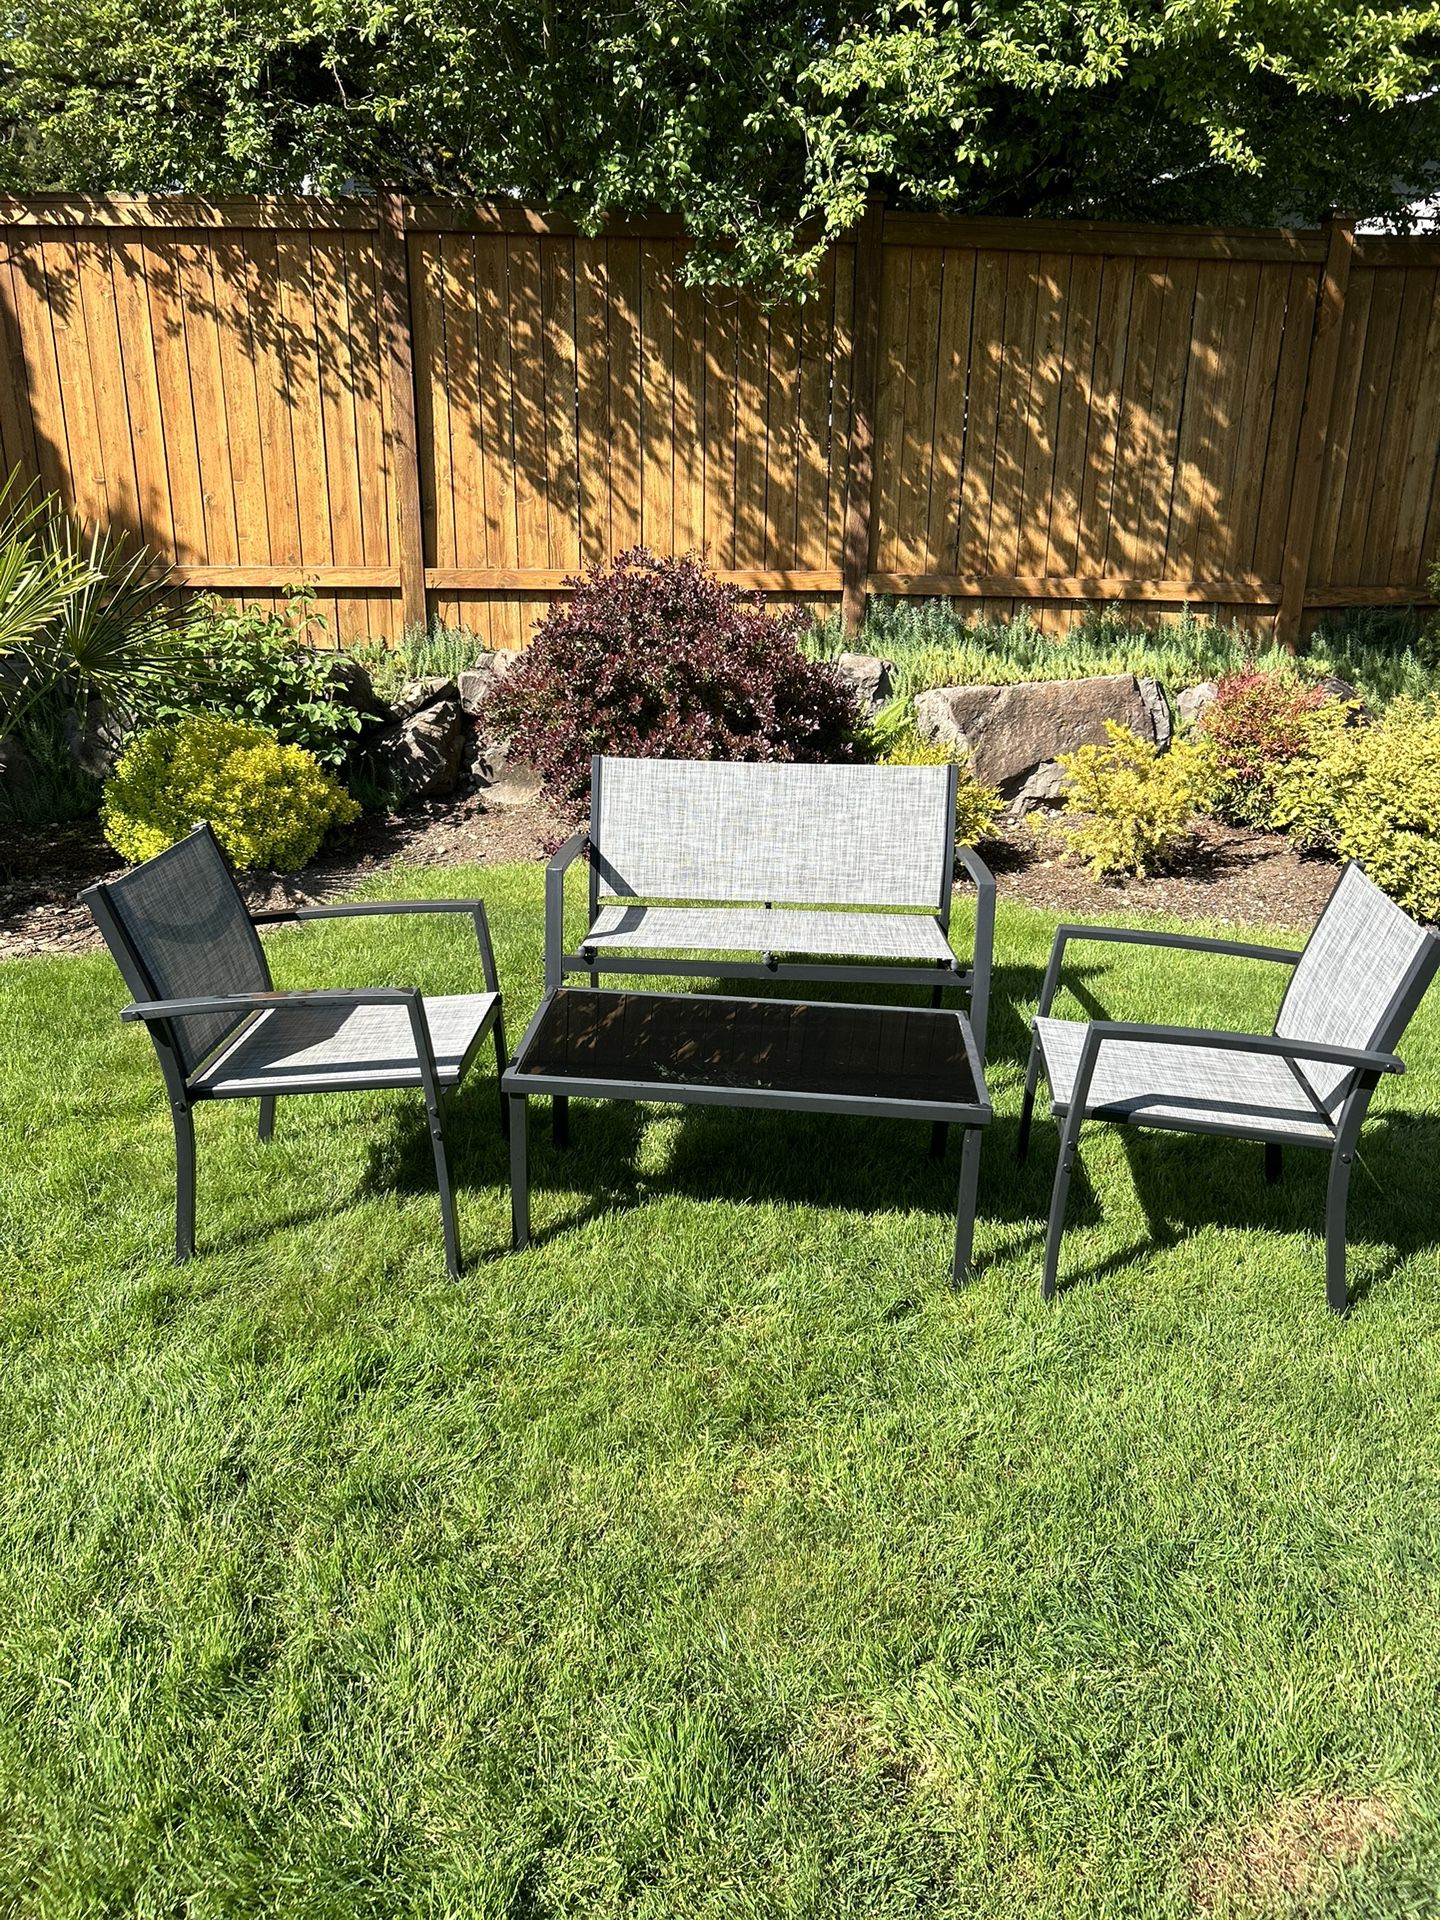 3 Piece Outdoor Furniture Good Condition 